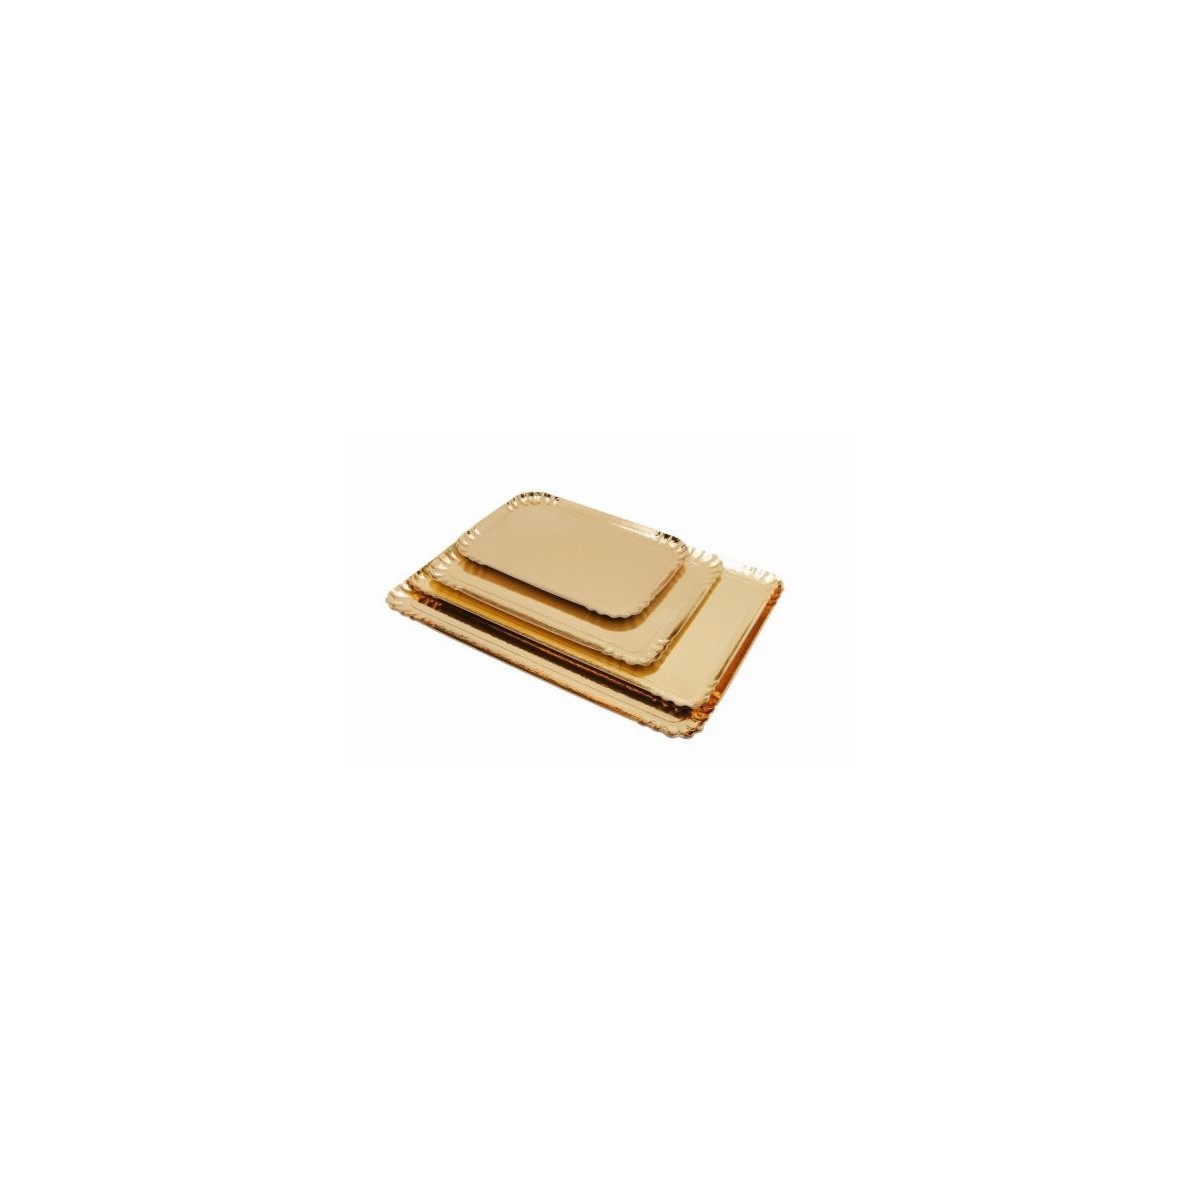 CARDBOARD TRAY RECTANGULAR GOLD 28X42CM 100 PIECES FOSTPLUS INCLUDED  BOX 